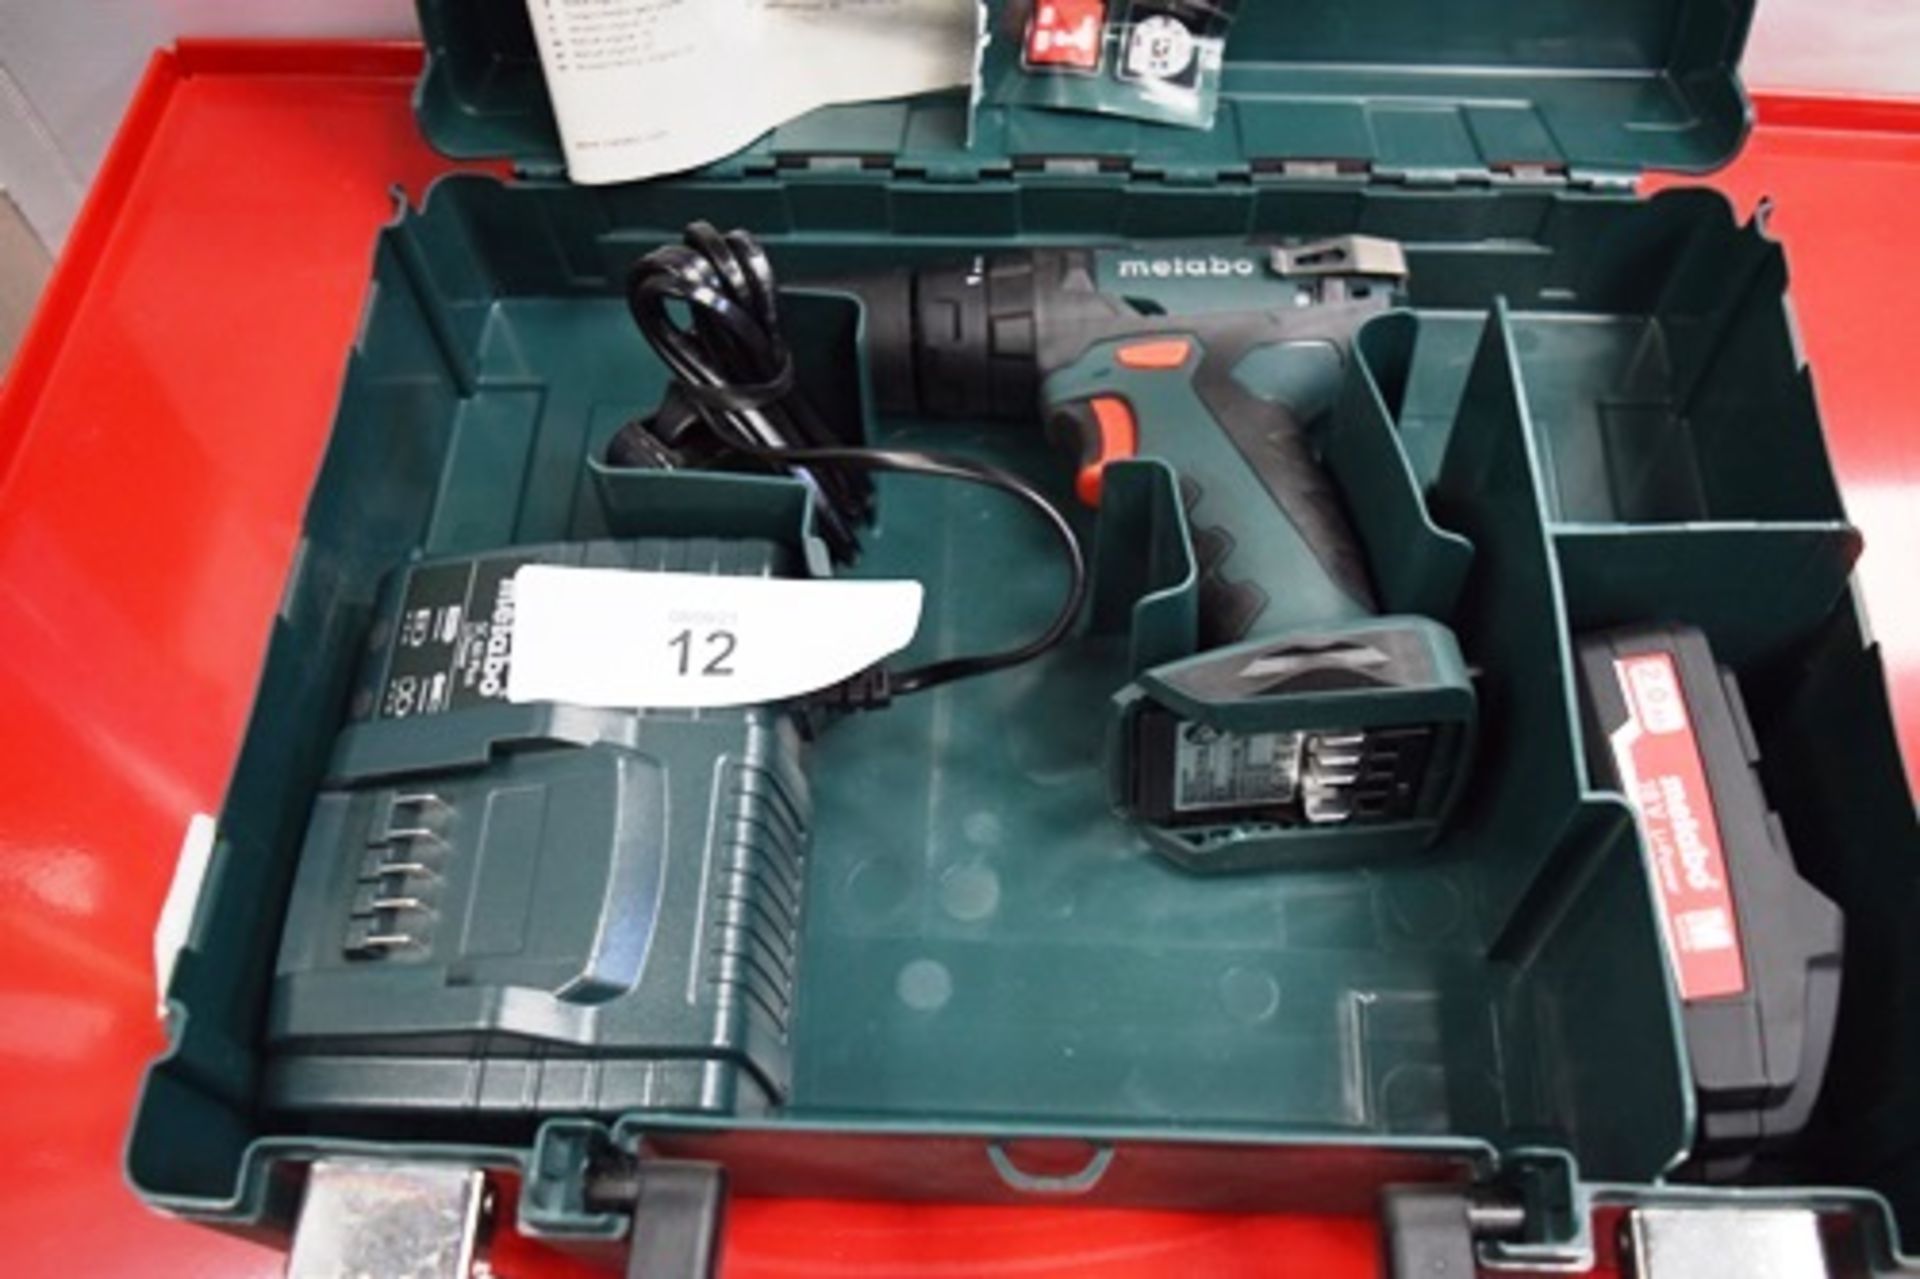 1 x Metabo 18V cordless drill, model SB18 + SC60 Plus, with 1 x 18V 2.0Ah battery, charger, manual - Image 2 of 4